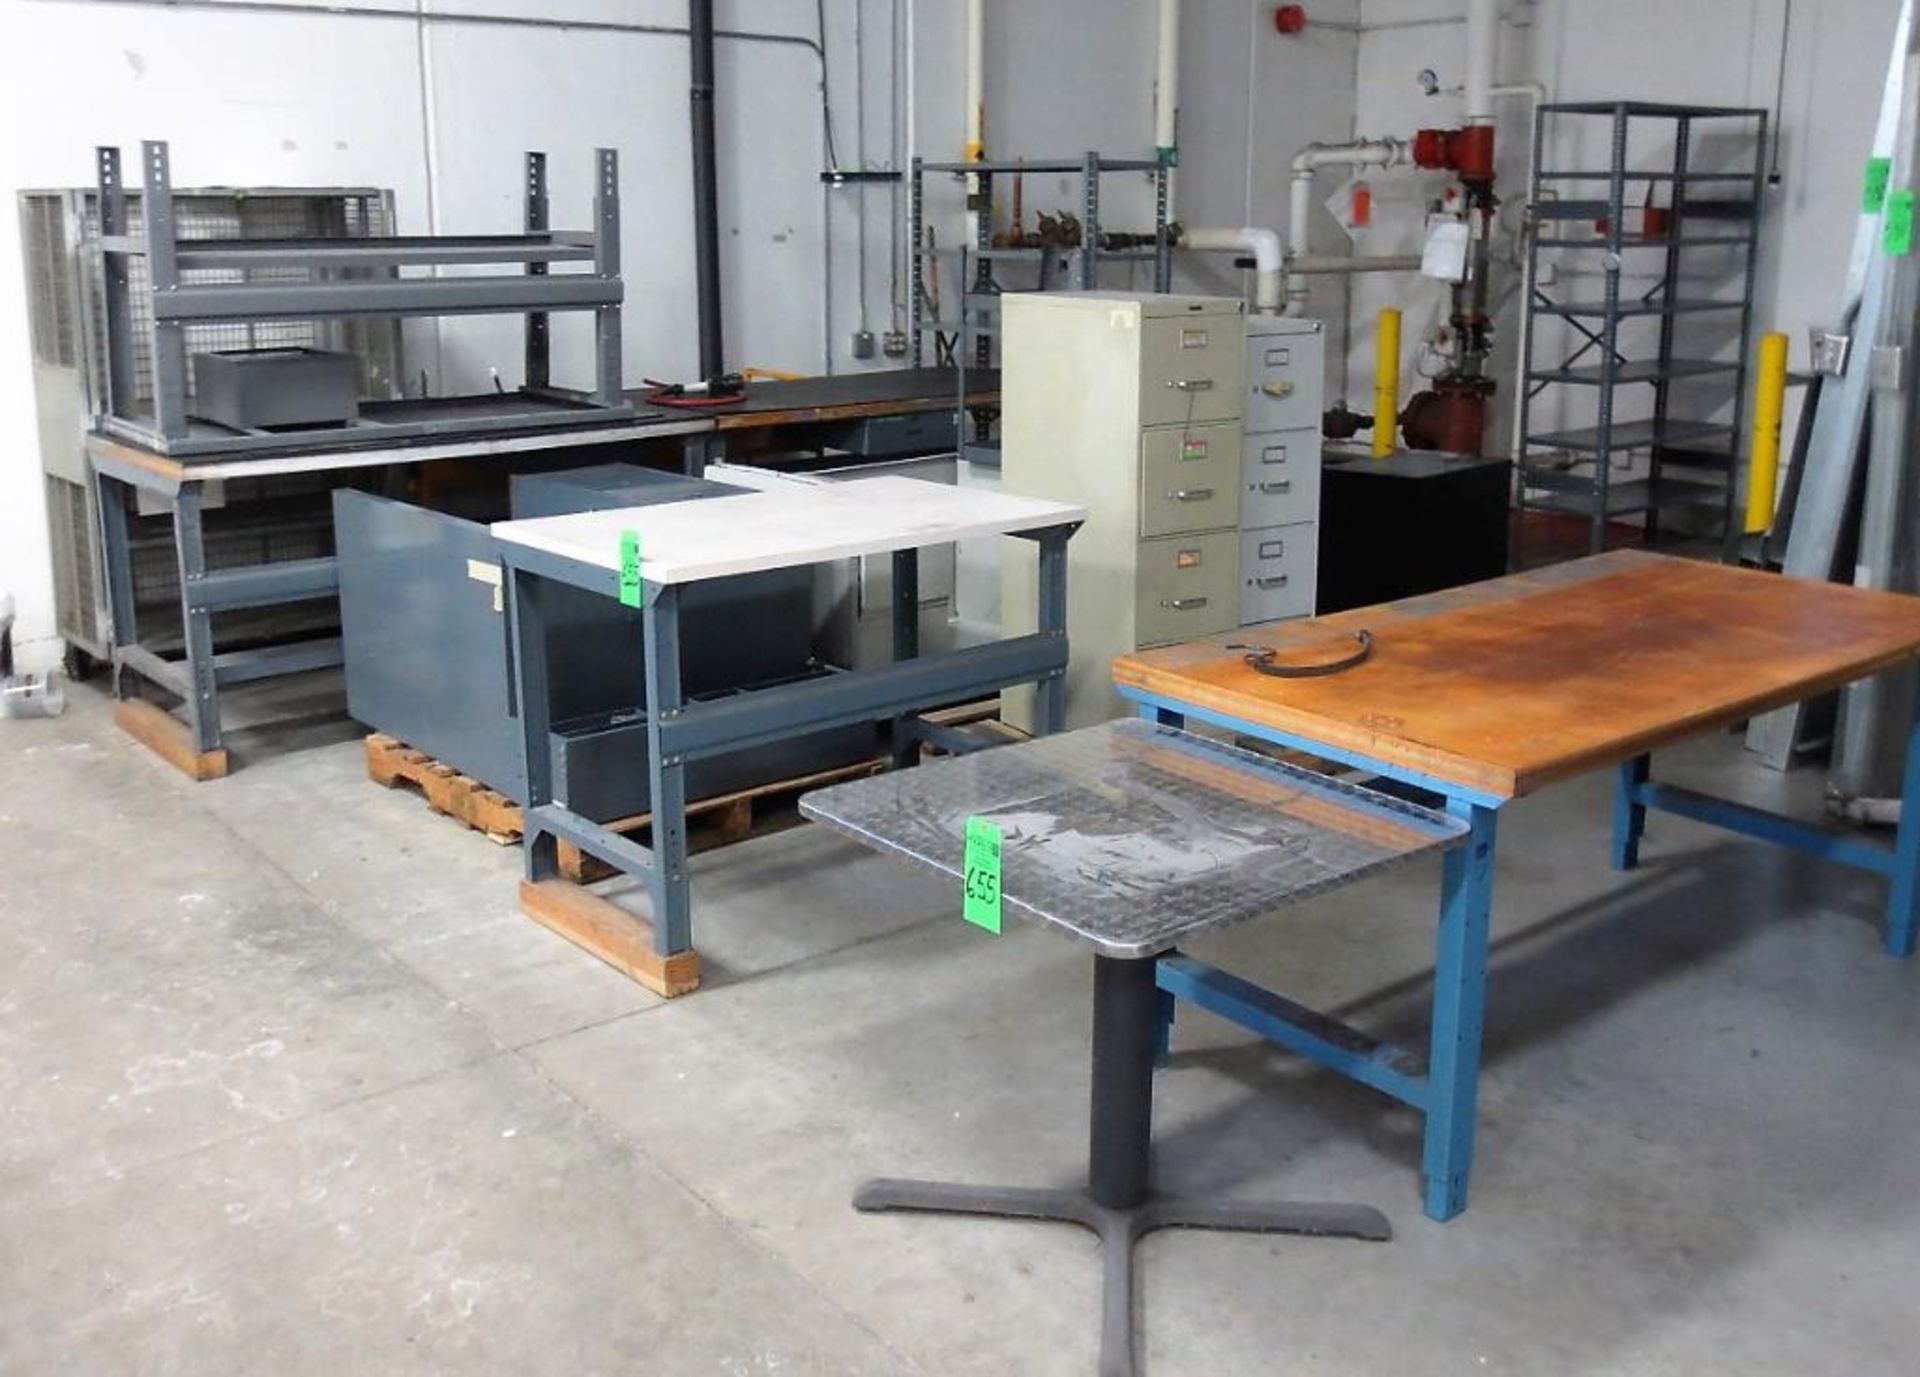 Work Benches, File Cabinets and Shelf.**Lot located at 651 N Dekora Woods Blvd., Saukville, WI 53080